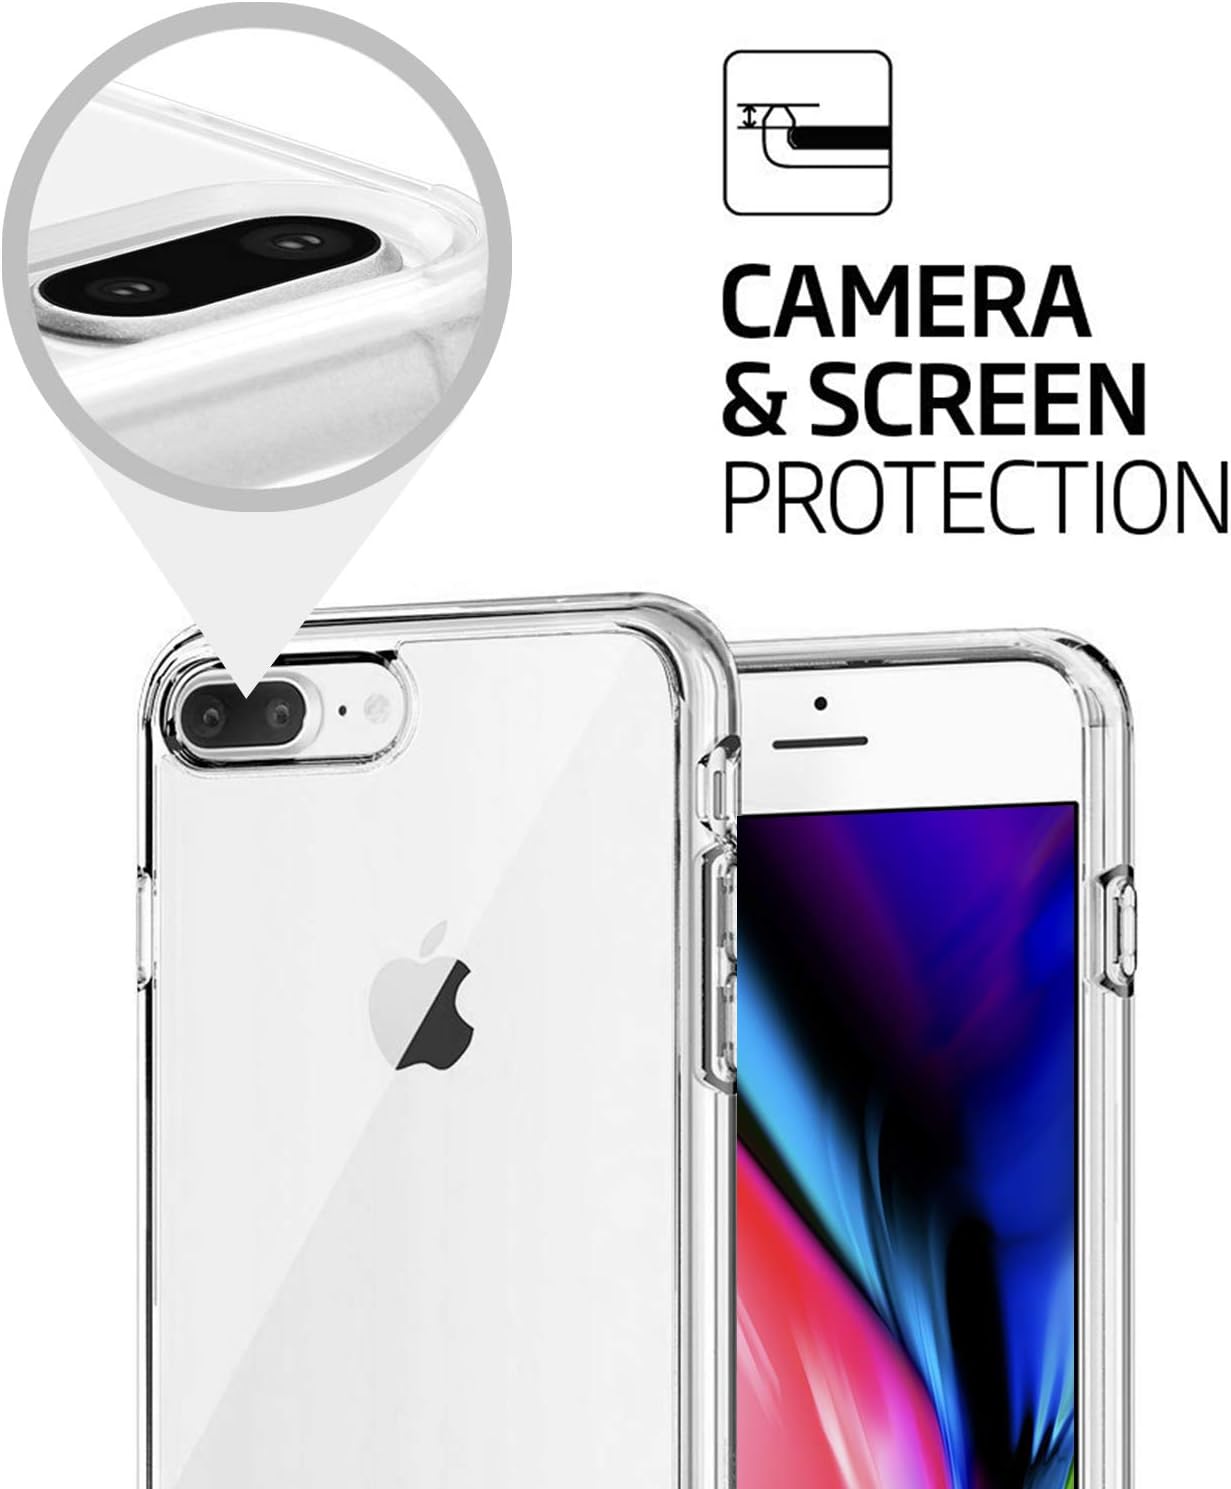 2 in 1 Combo - Case & Screen Protector for iPhone 8 Plus & 7 Plus *Free Shipping*